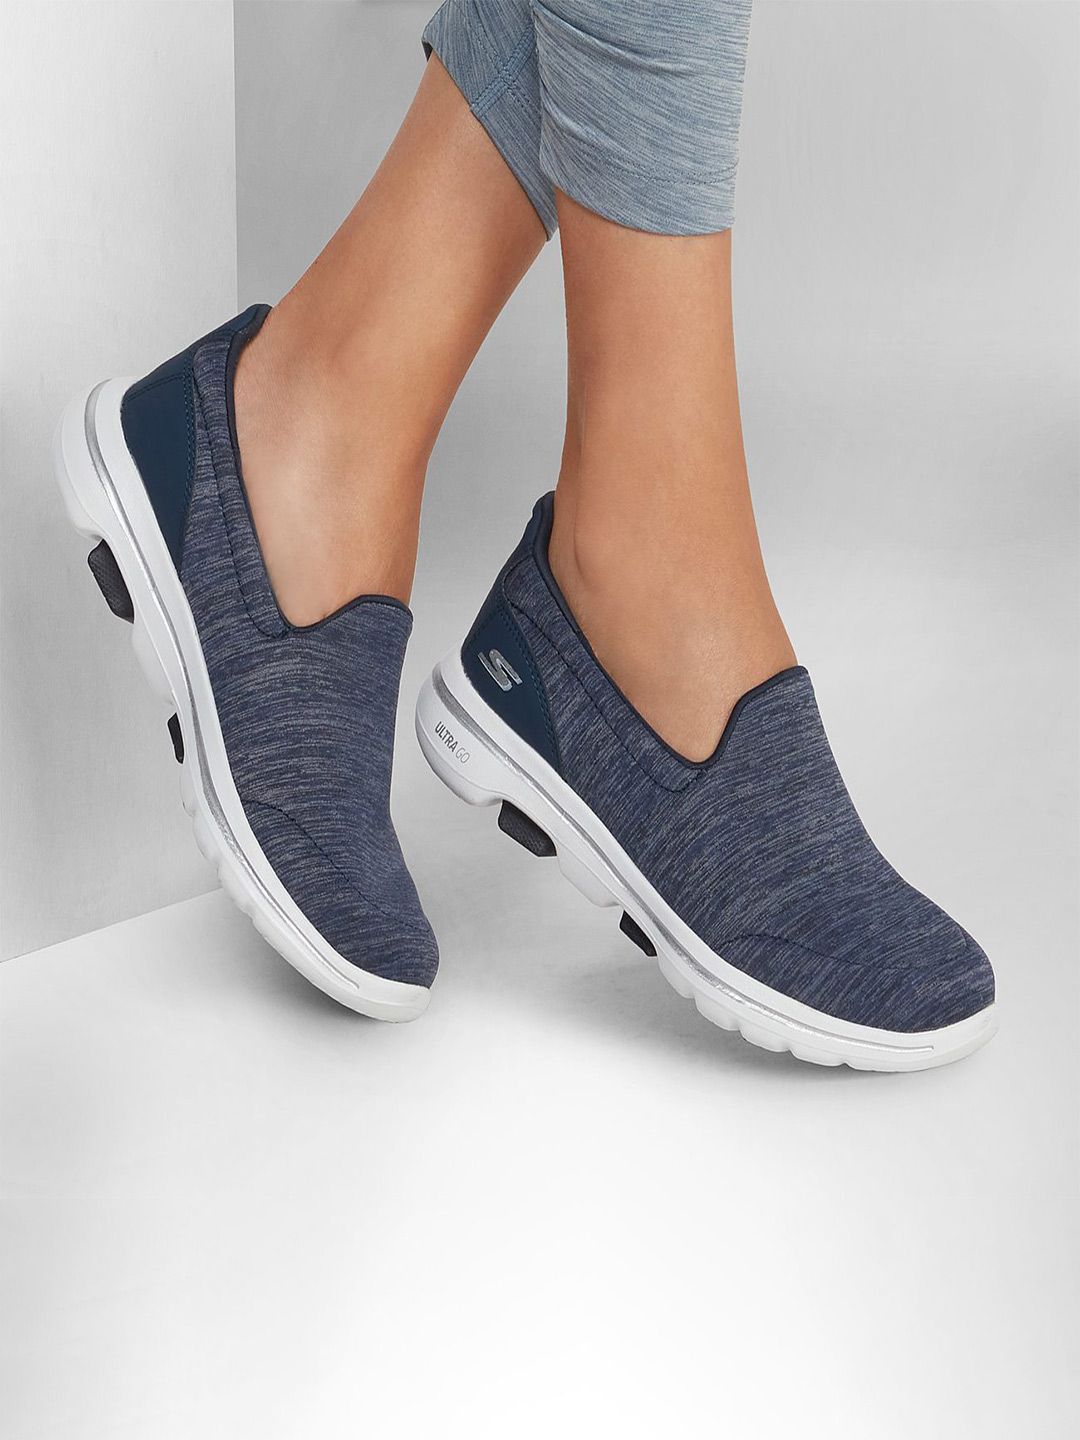 Skechers Women Navy Blue Sports Shoes Price in India